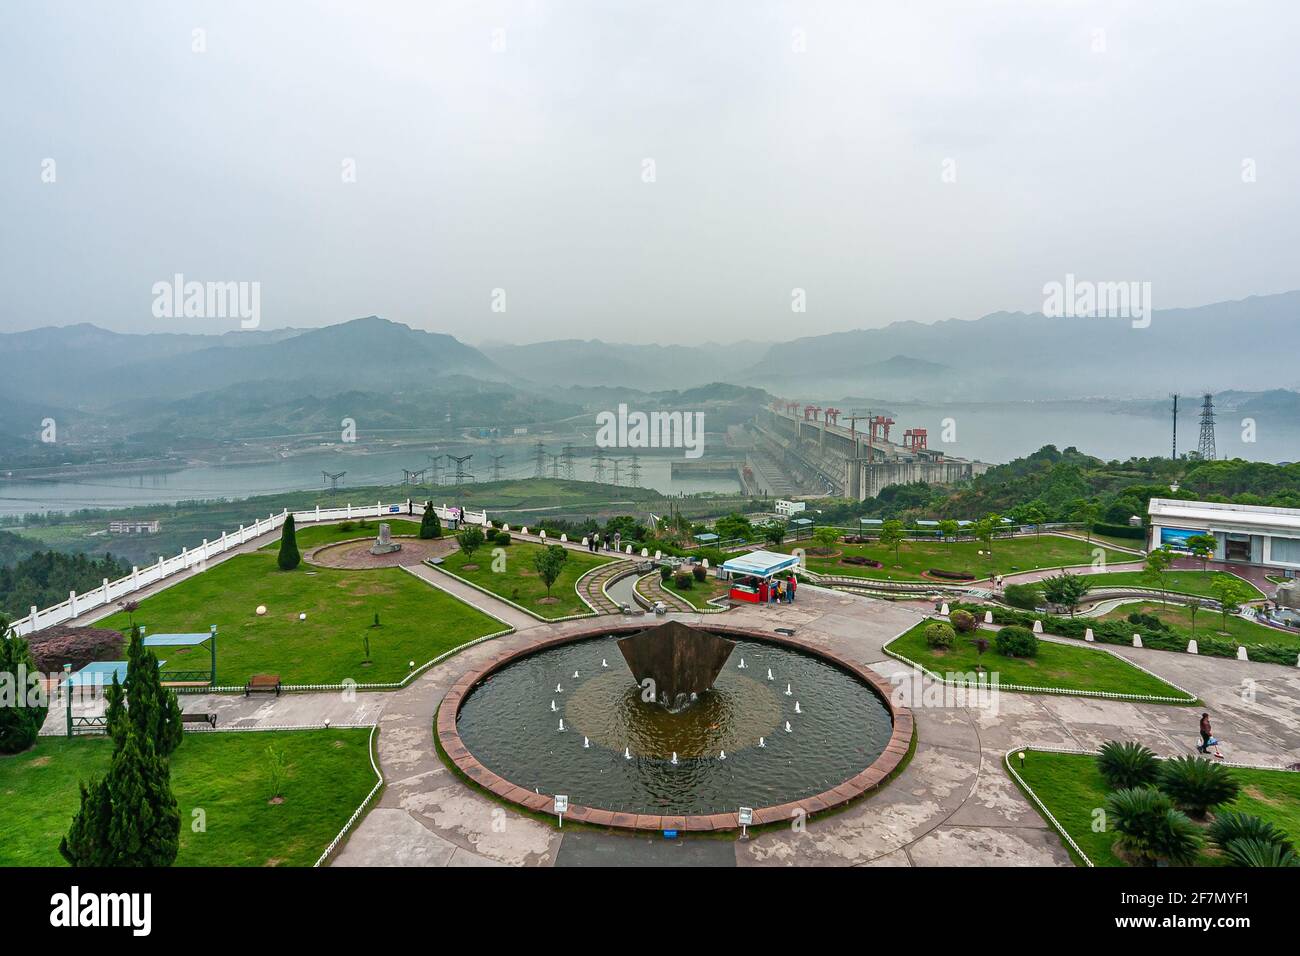 Three Gorges Dam, China - May 6, 2010: Yangtze River. Large fountain near visitor center with wide view over dam itself, river, and green hills under Stock Photo